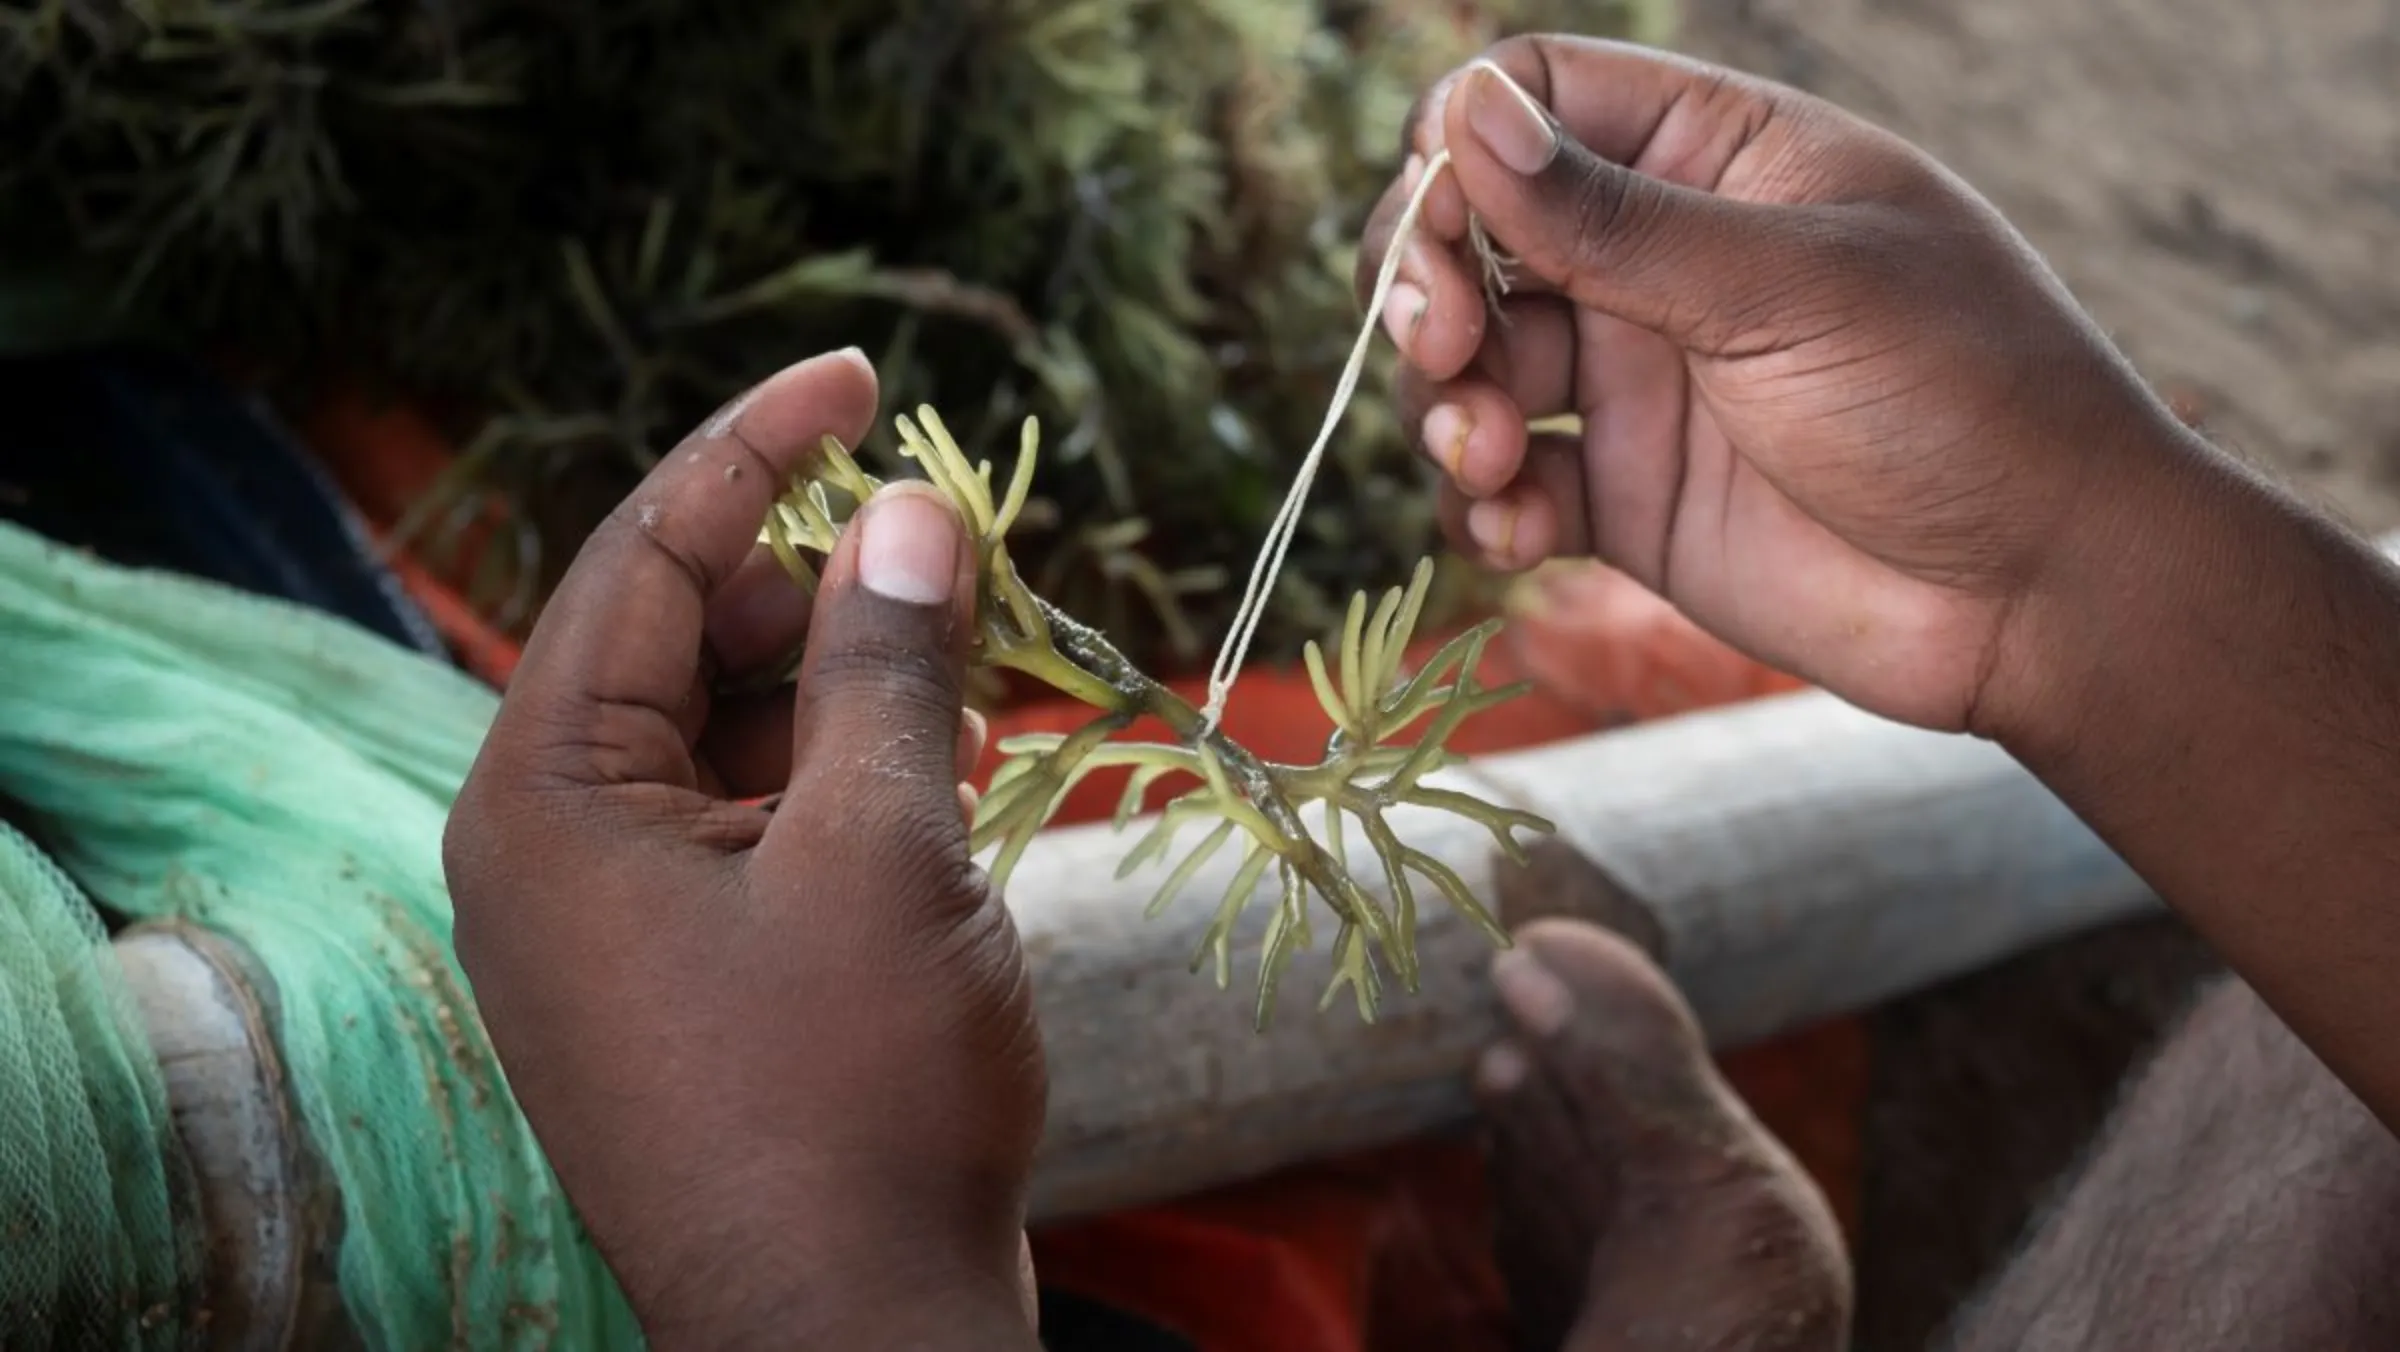 Microbiology student Sundaragnanam strings seaweed onto a cultivation raft in Rameswaram, India on July 17, 2023. Thomson Reuters Foundation/Nirbhay Kuppu